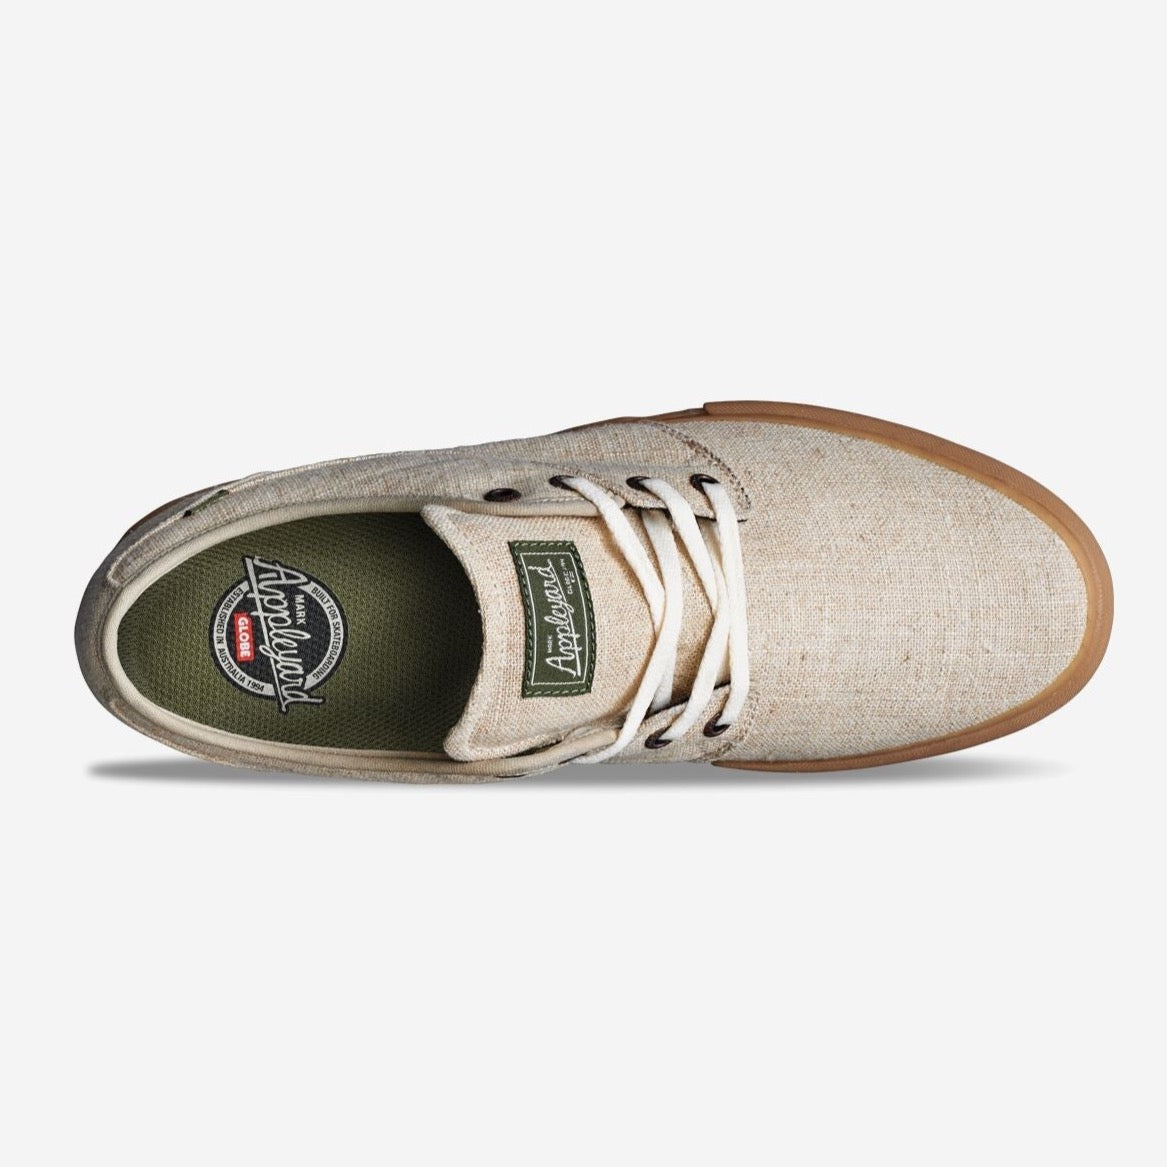 GLOBE - Mahalo Hemp Shoes | Vegan Skate Shoes | Sustainable Footwear - all things being eco chilliwack